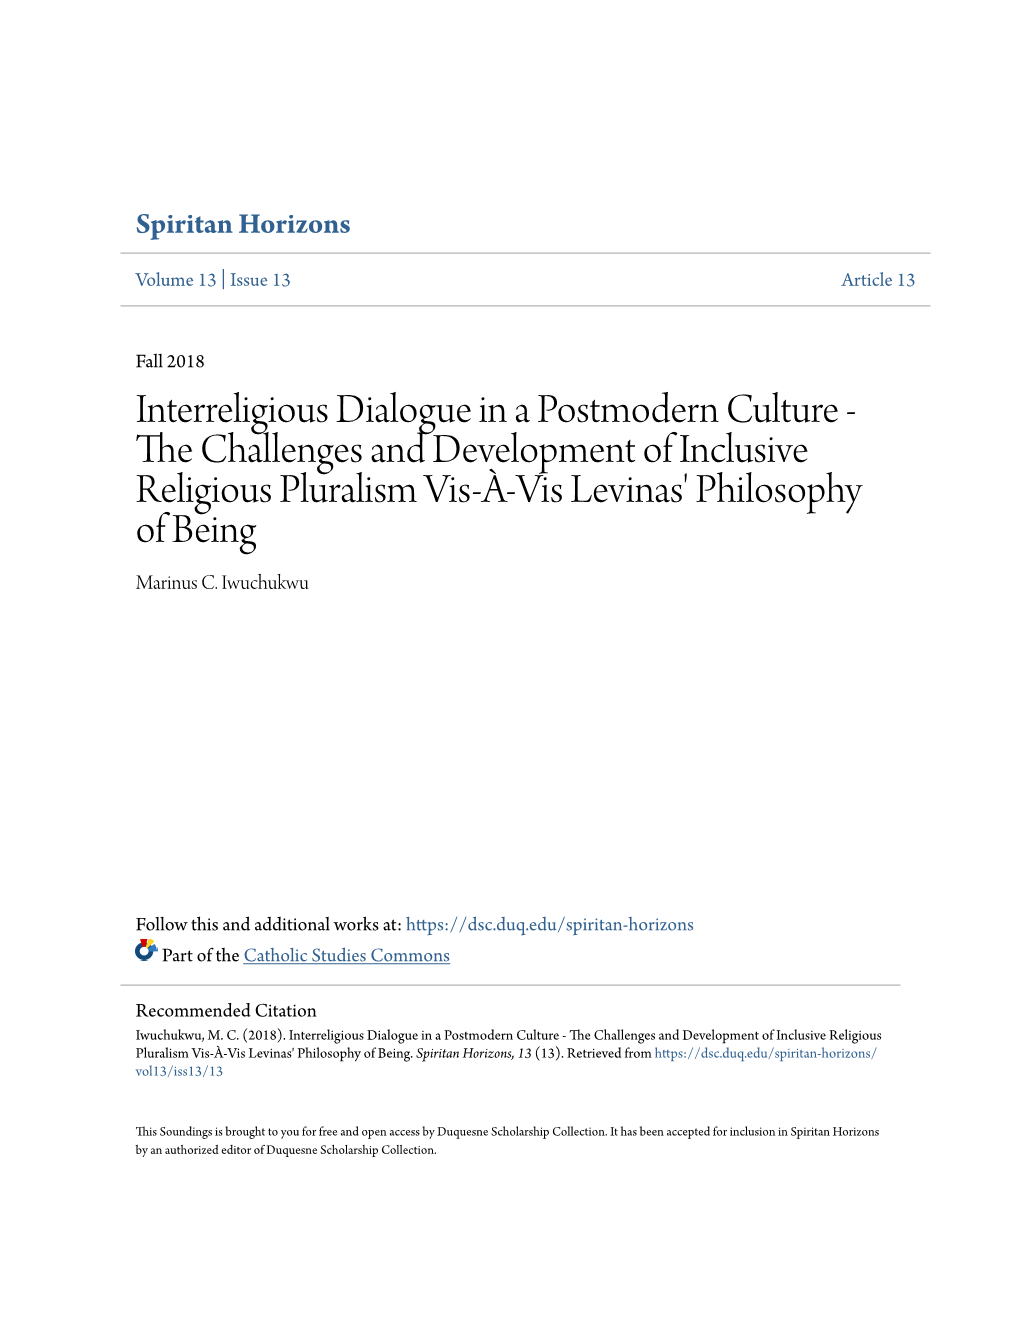 Interreligious Dialogue in a Postmodern Culture - the Hc Allenges and Development of Inclusive Religious Pluralism Vis-À-Vis Levinas' Philosophy of Being Marinus C